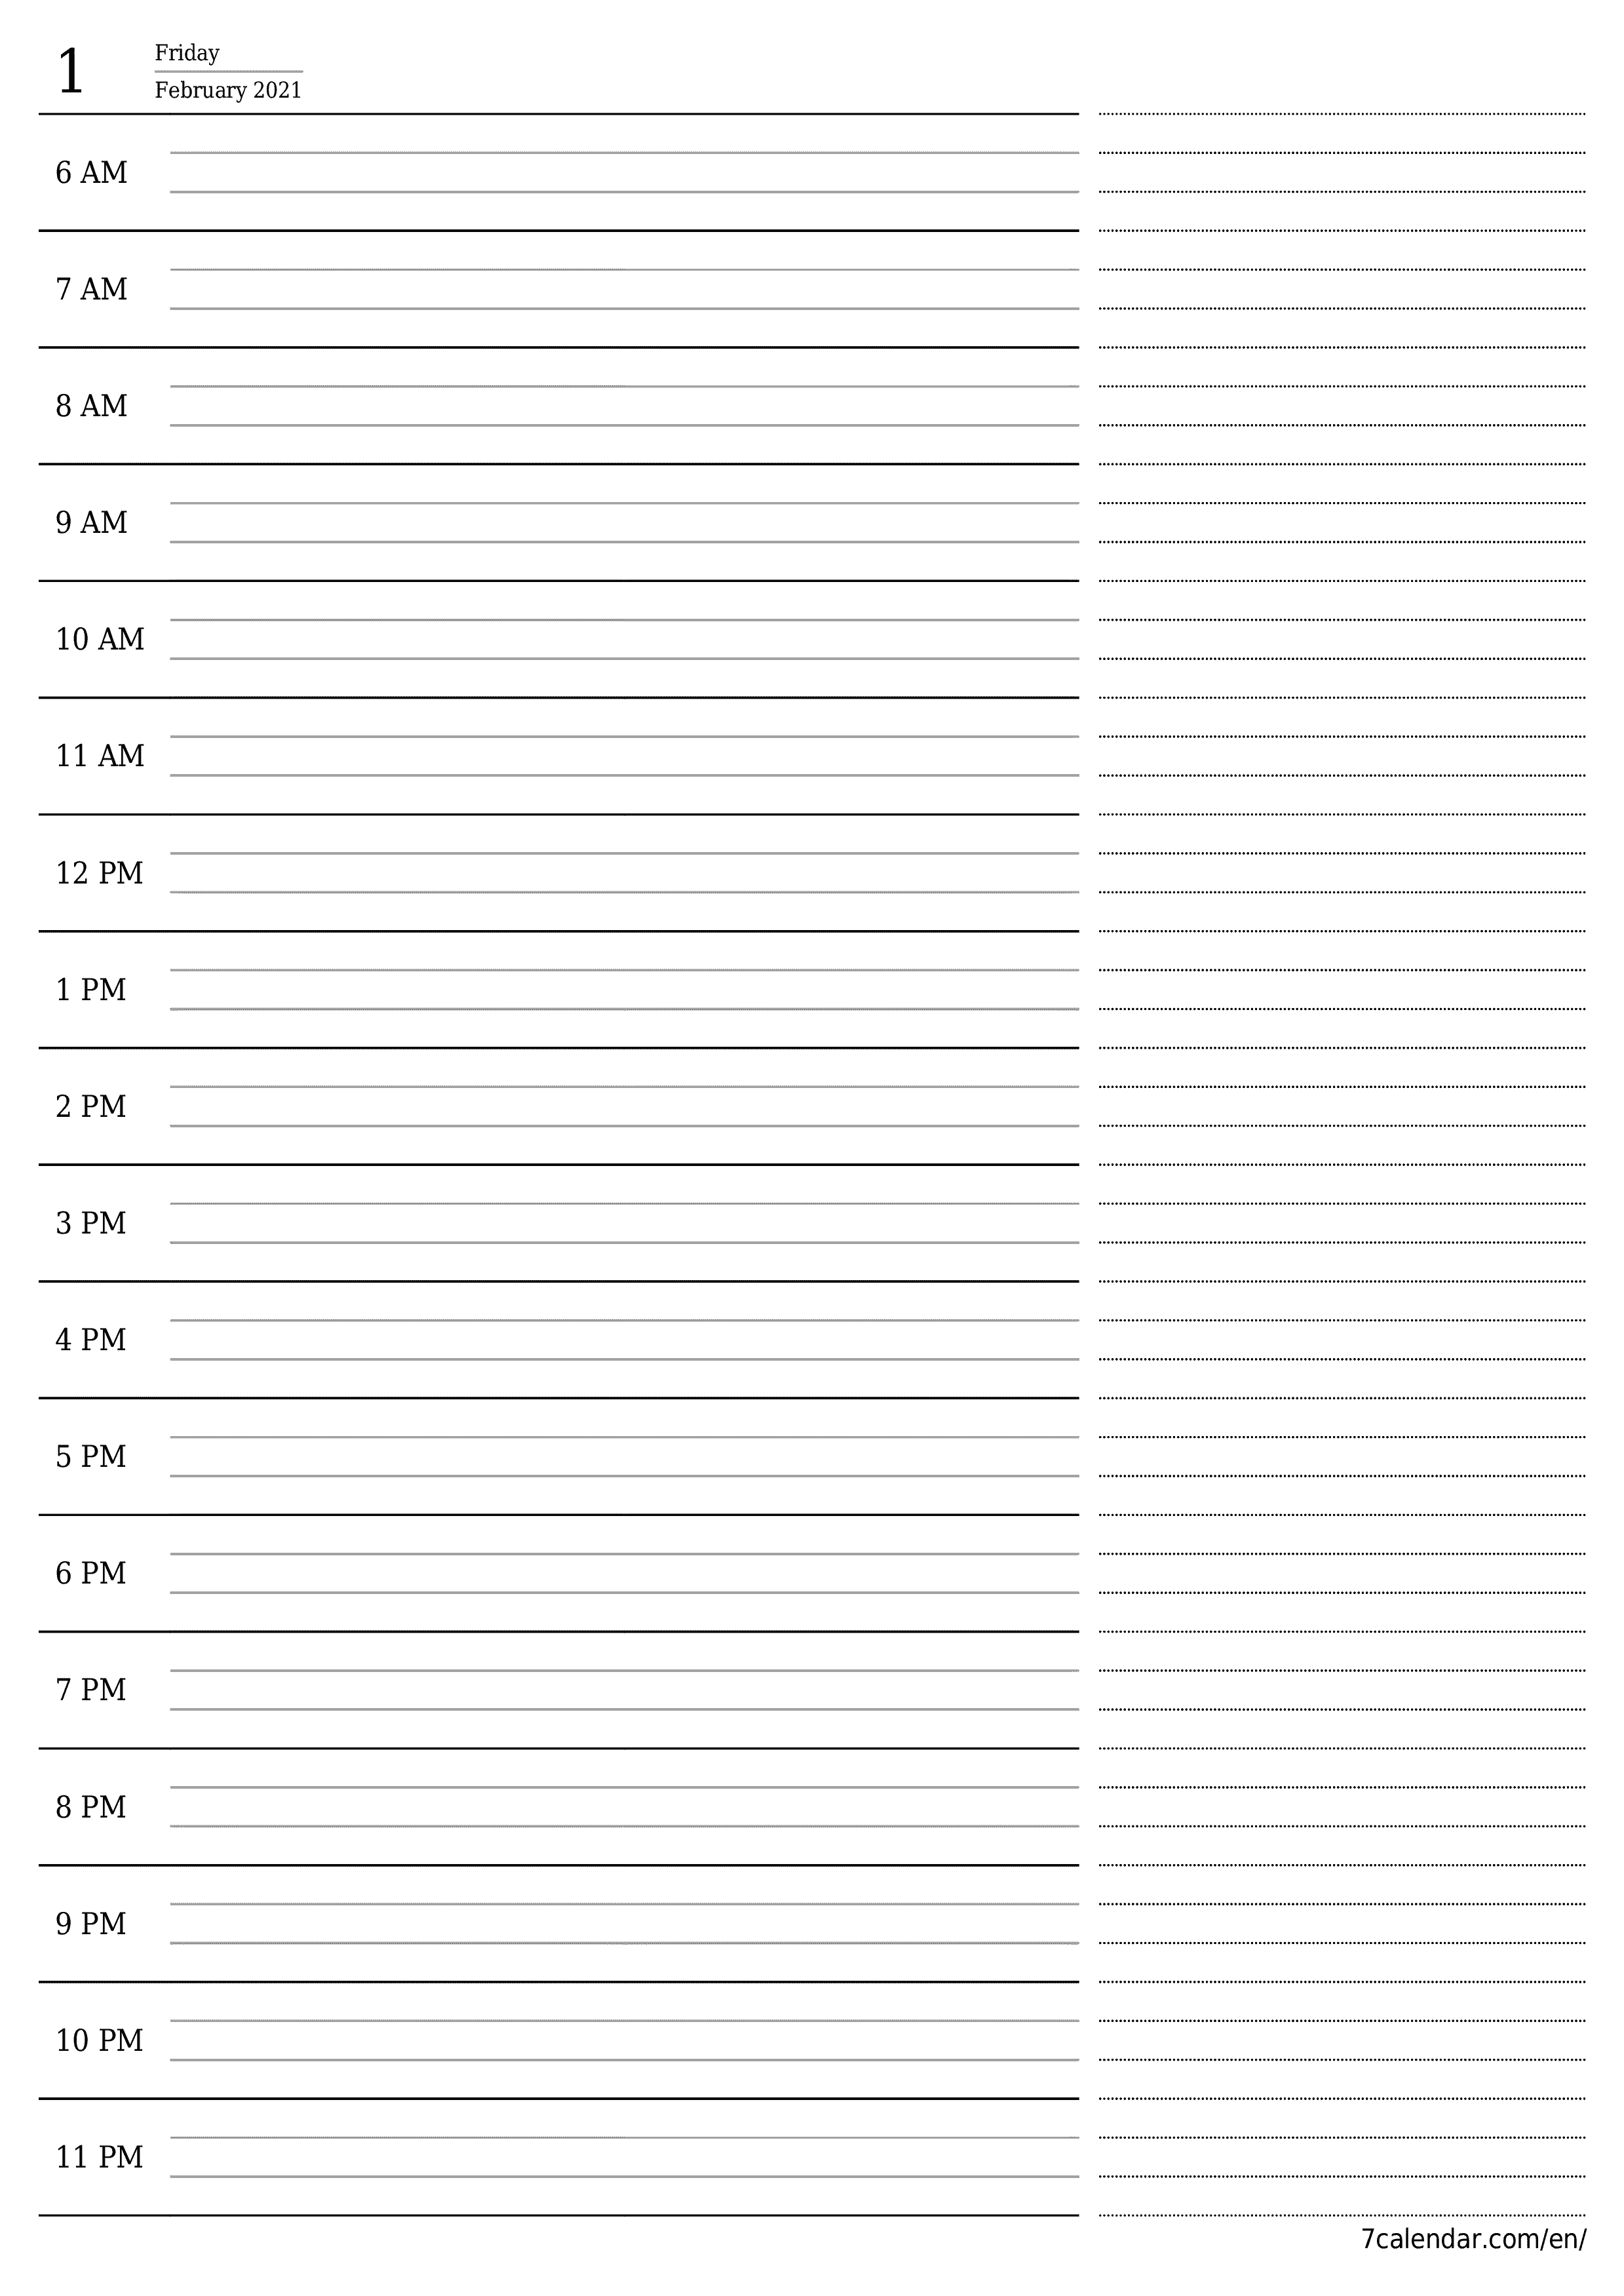 Blank daily calendar planner for day February 2021 with notes, save and print to PDF PNG English - 7calendar.com